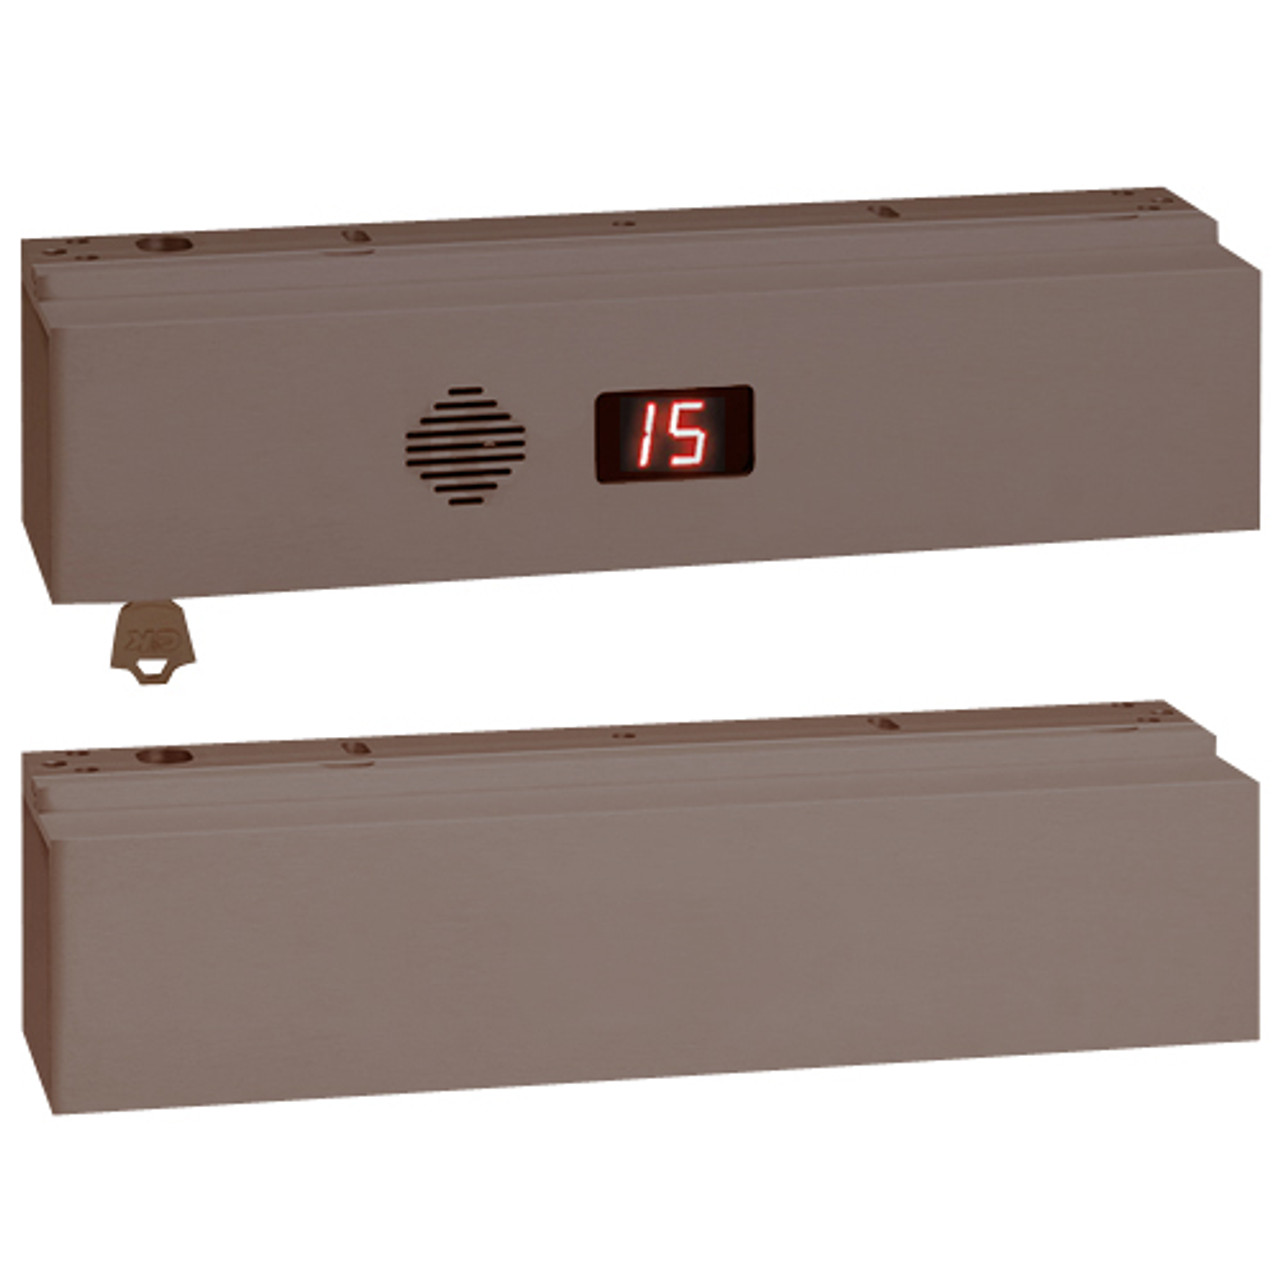 1511T-ND-K-X-B2A2 SDC 1511T Series Tandem Integrated Delayed Egress Locks with Magnetic Bond Sensor and Anti-Tamper Switch in Dark Bronze